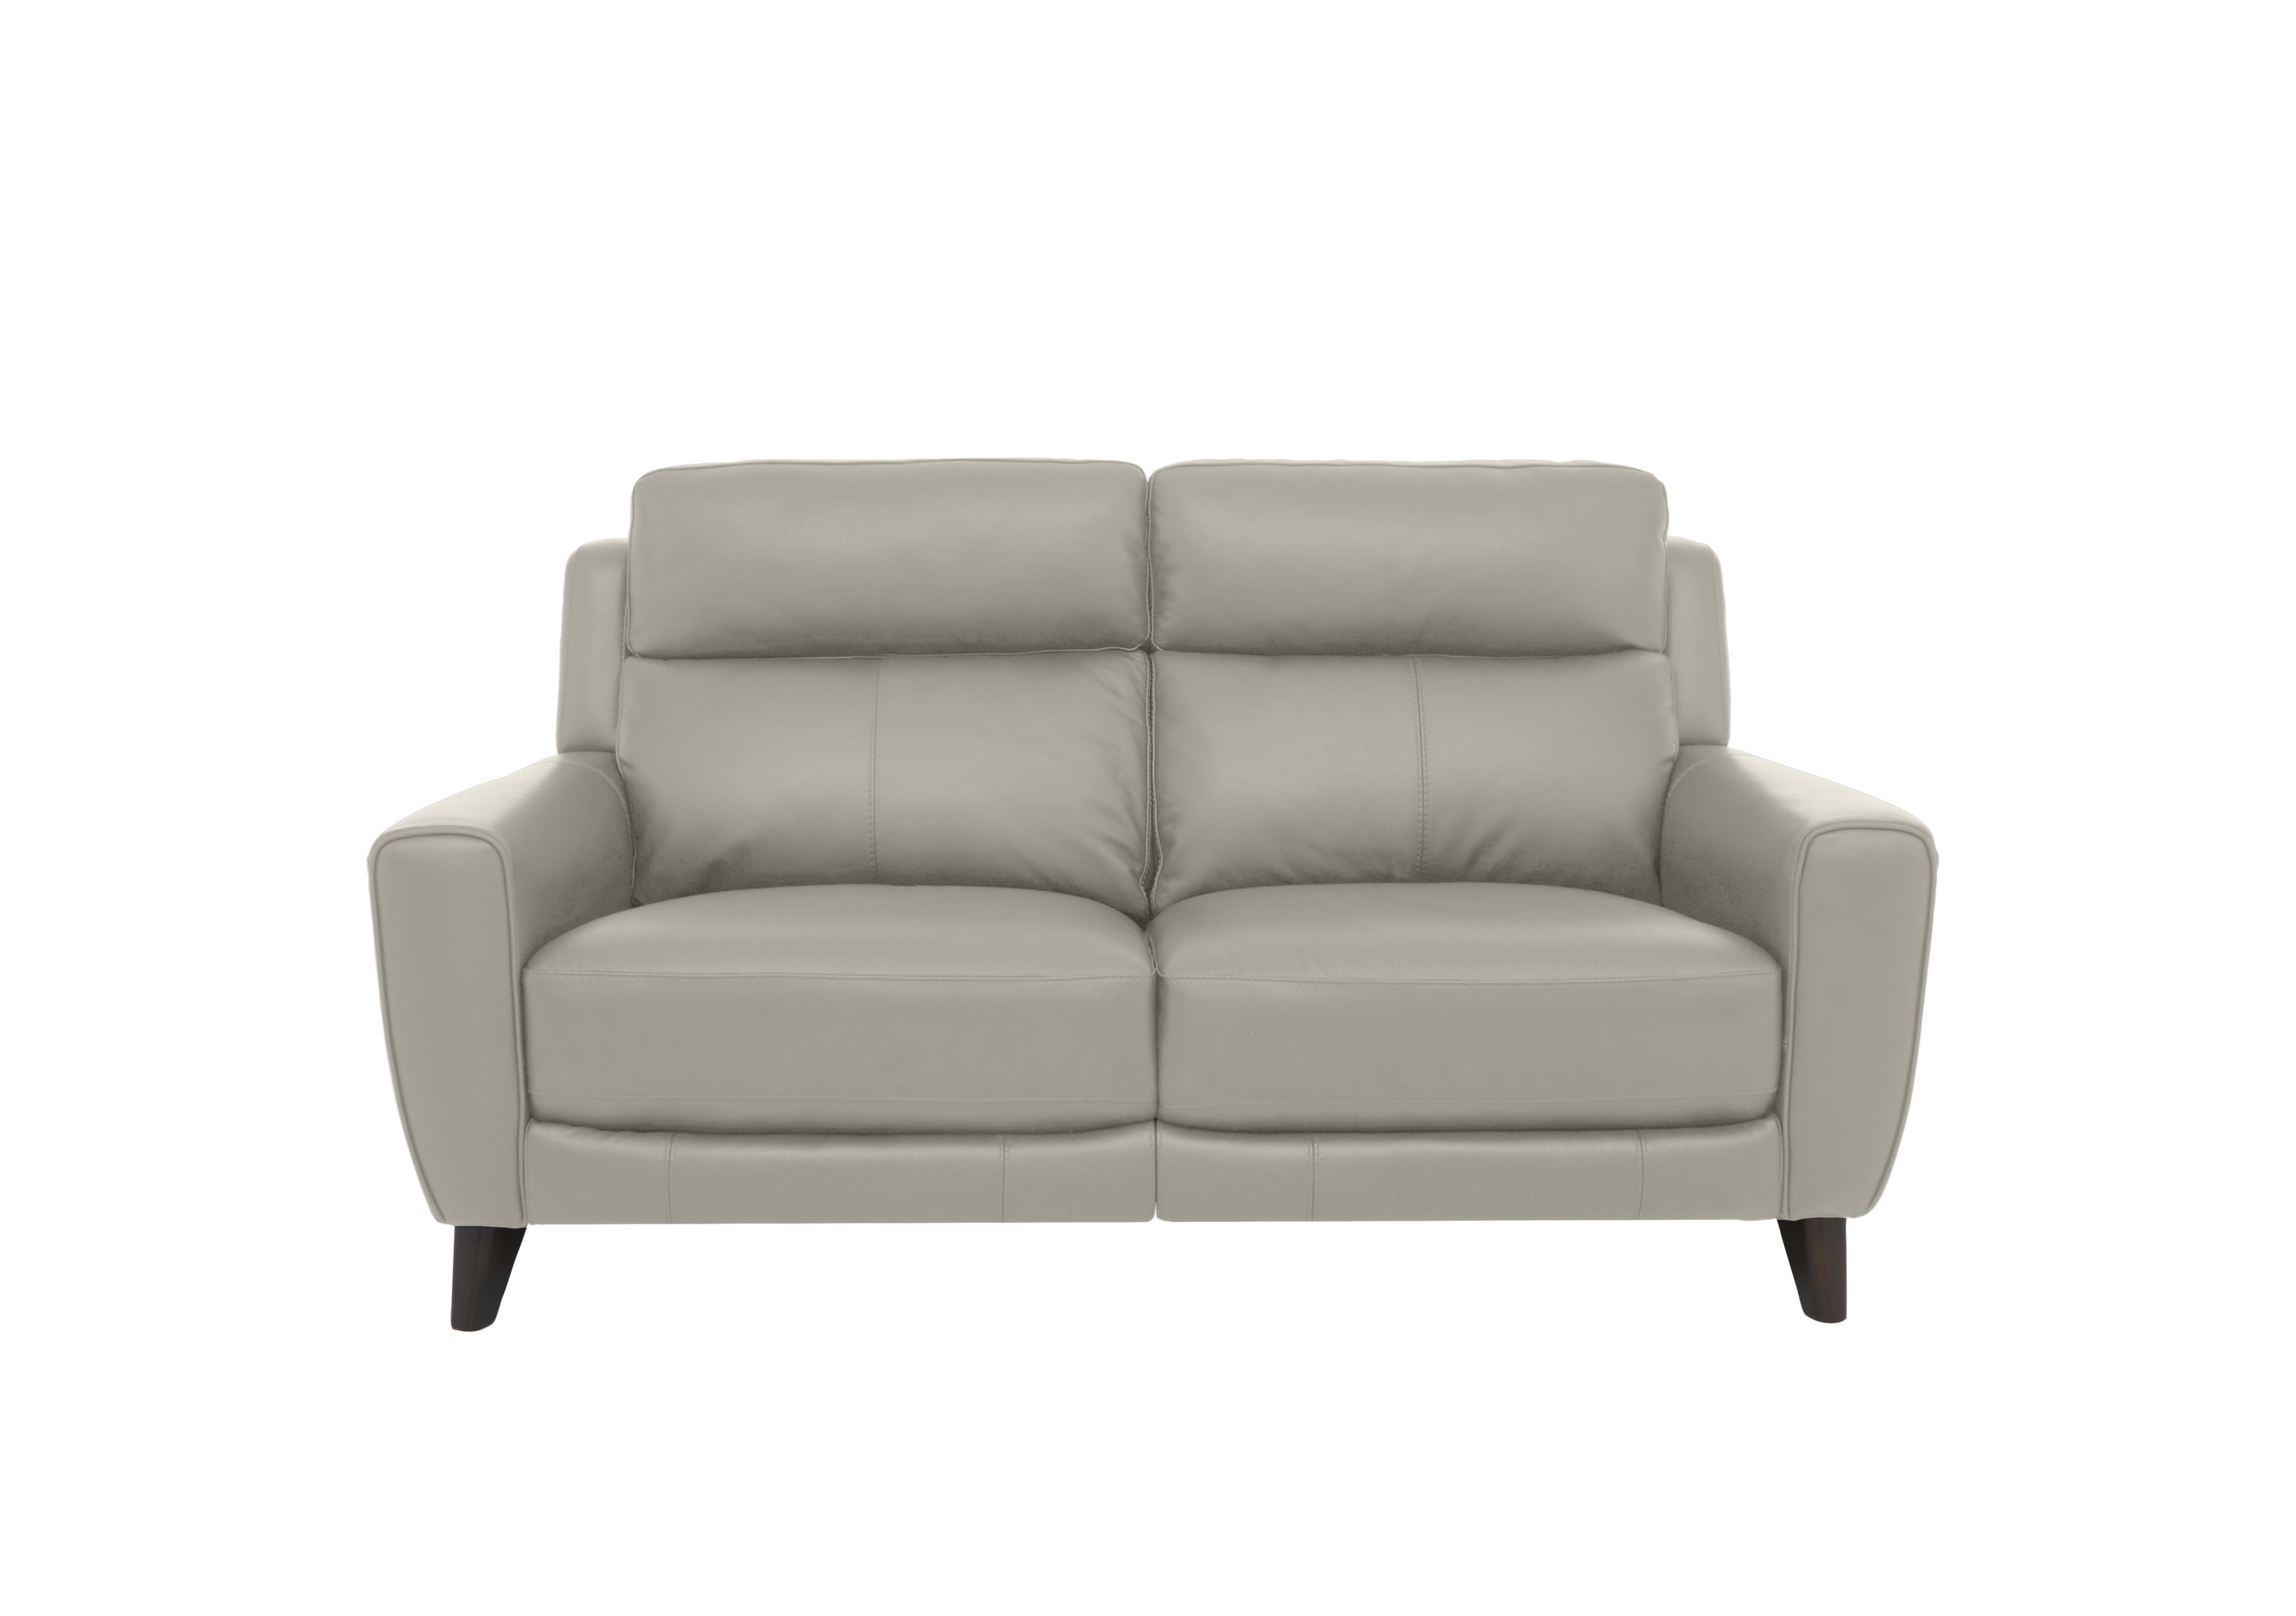 Zen 2 Seater Leather Power Recliner Sofa with Power Headrests in Bx-251e Grey on Furniture Village